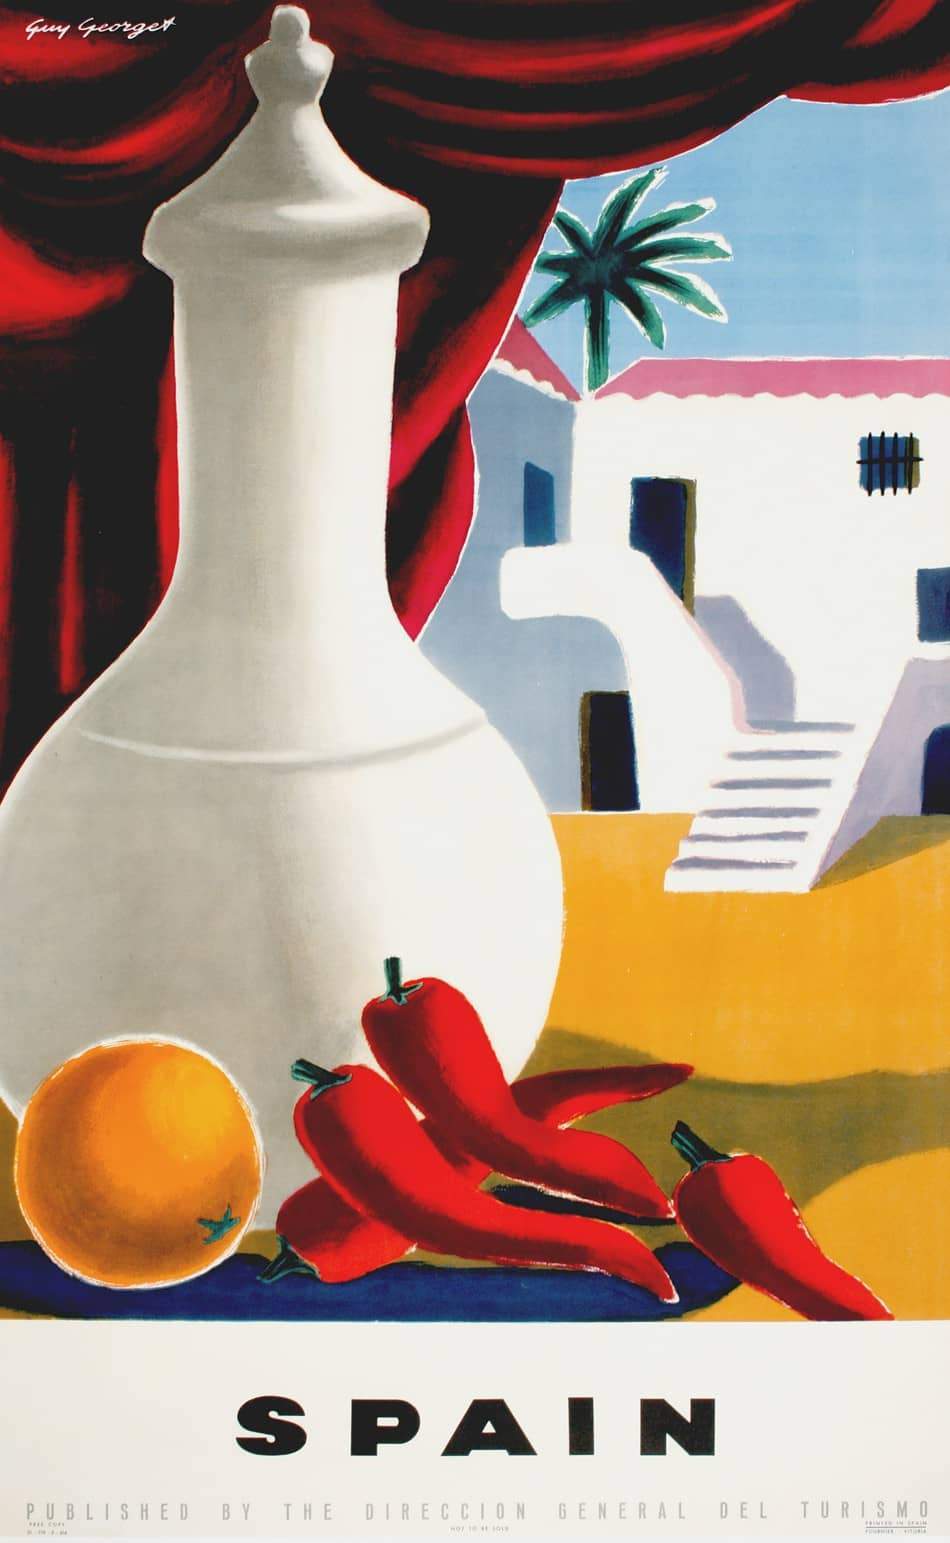 Original Spain Travel Poster 1950's by Guy Georget Peppers and Orange